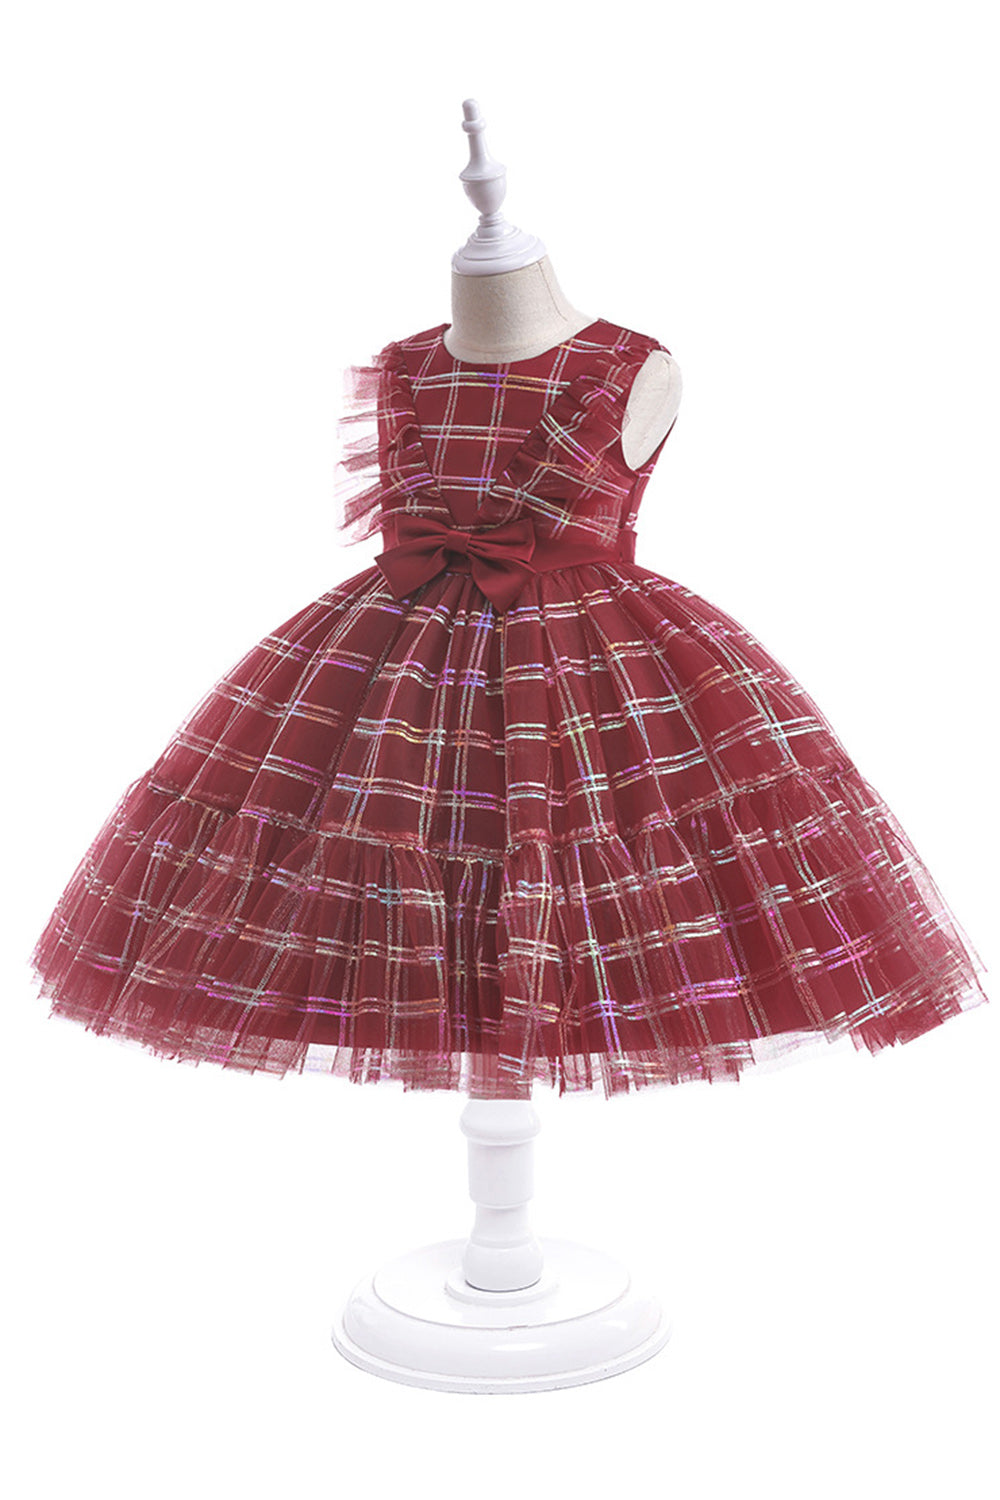 A Line Plaid Girl's Party Dress with Bow